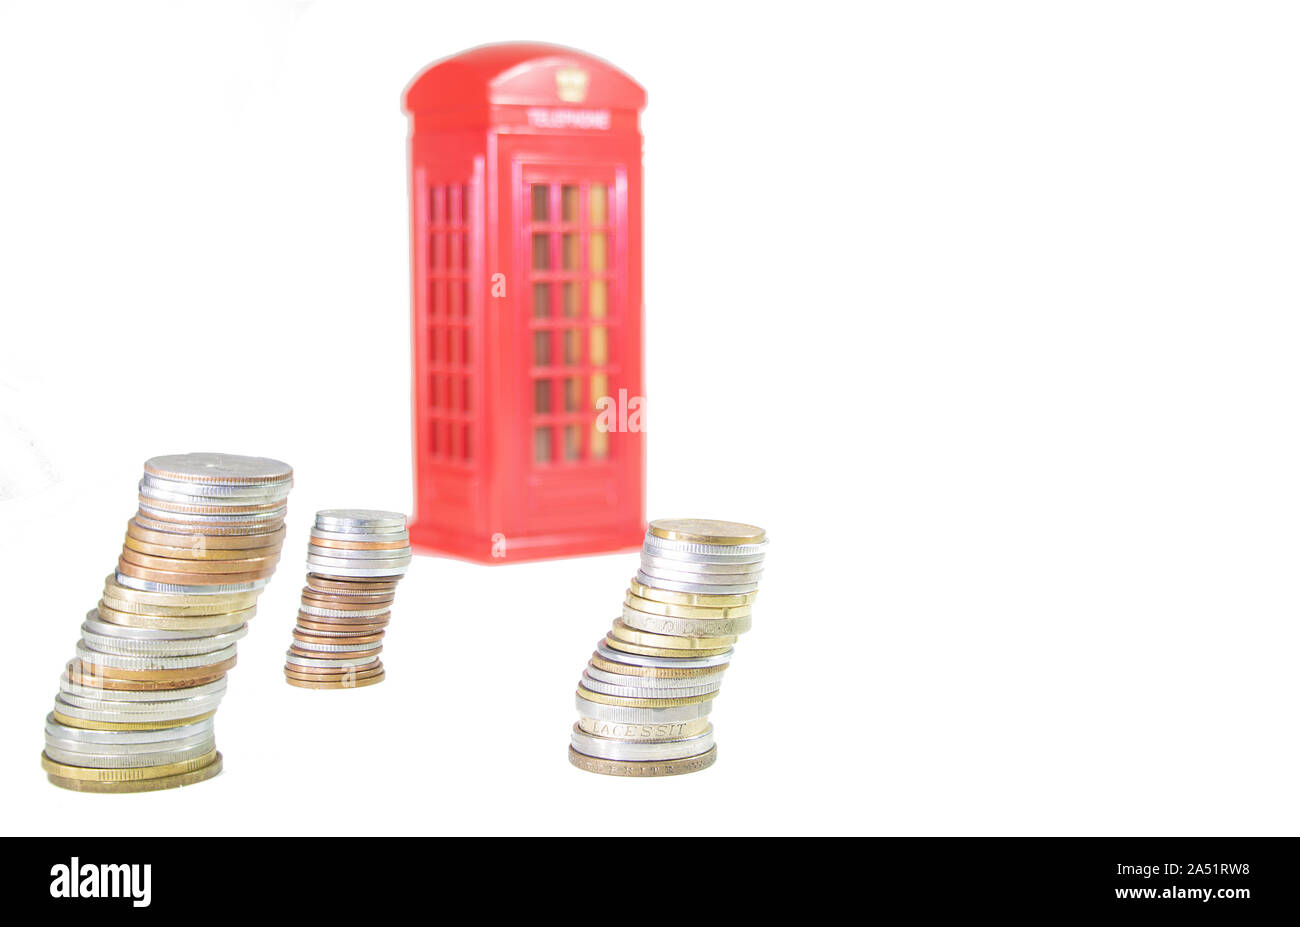 UK Brexit. piles of coins with an with a phone booth in the background out of focus on an overexposed white background. Brexit concept Stock Photo